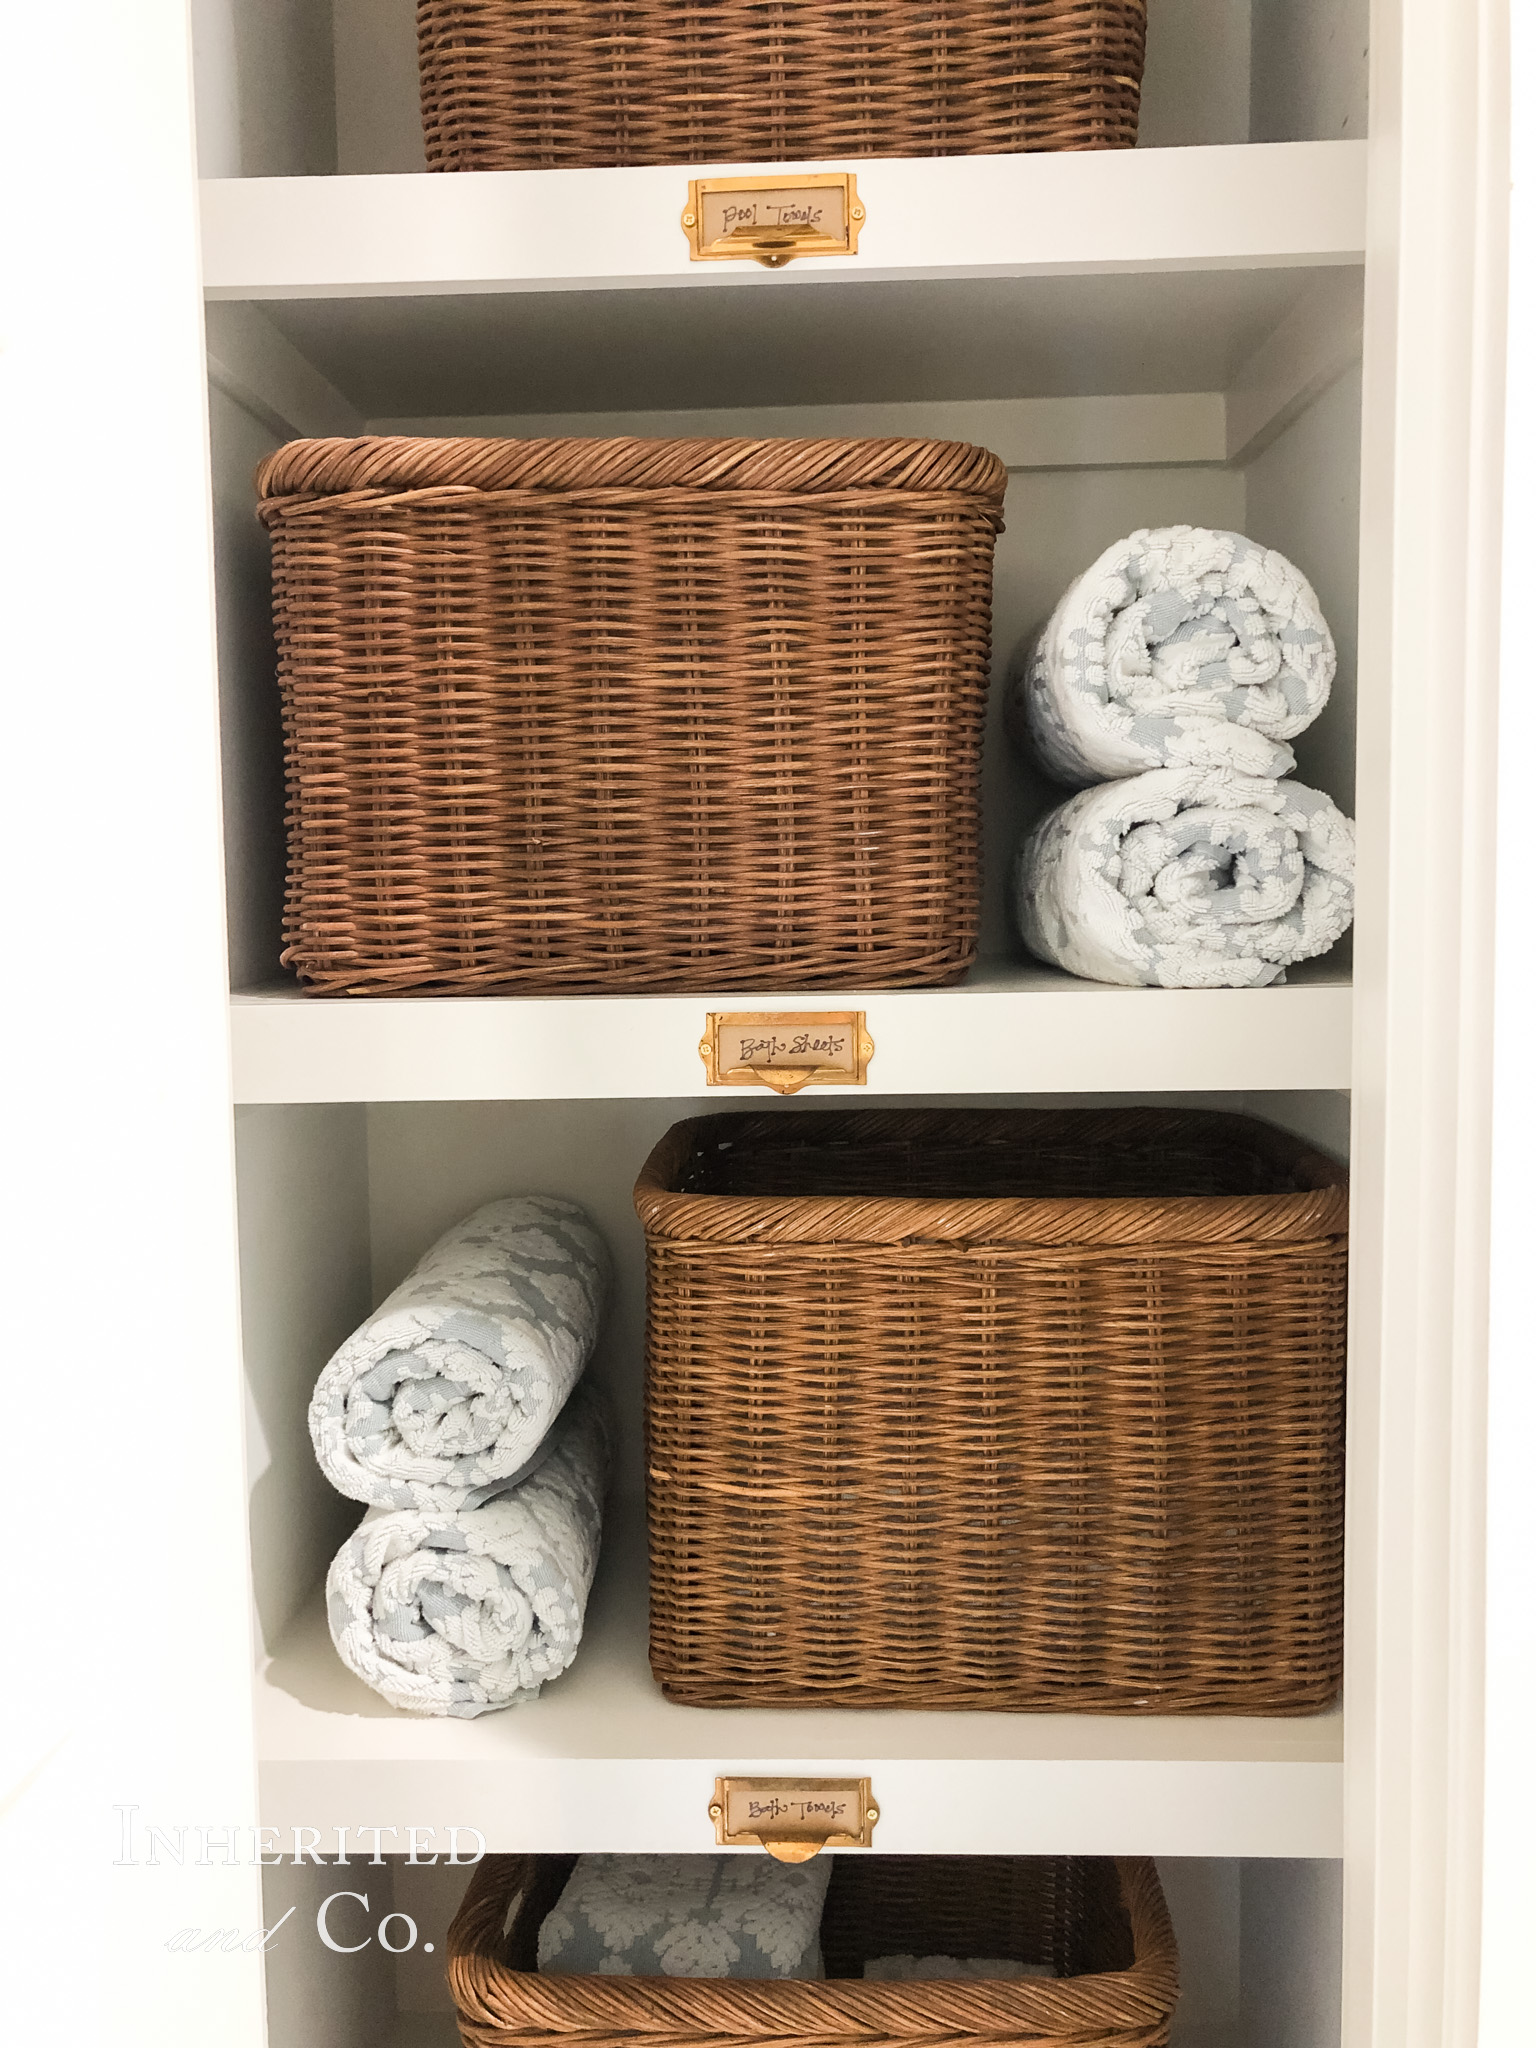 Towel Closet Organization with Rattan Baskets and Antique Card Catalog Labels